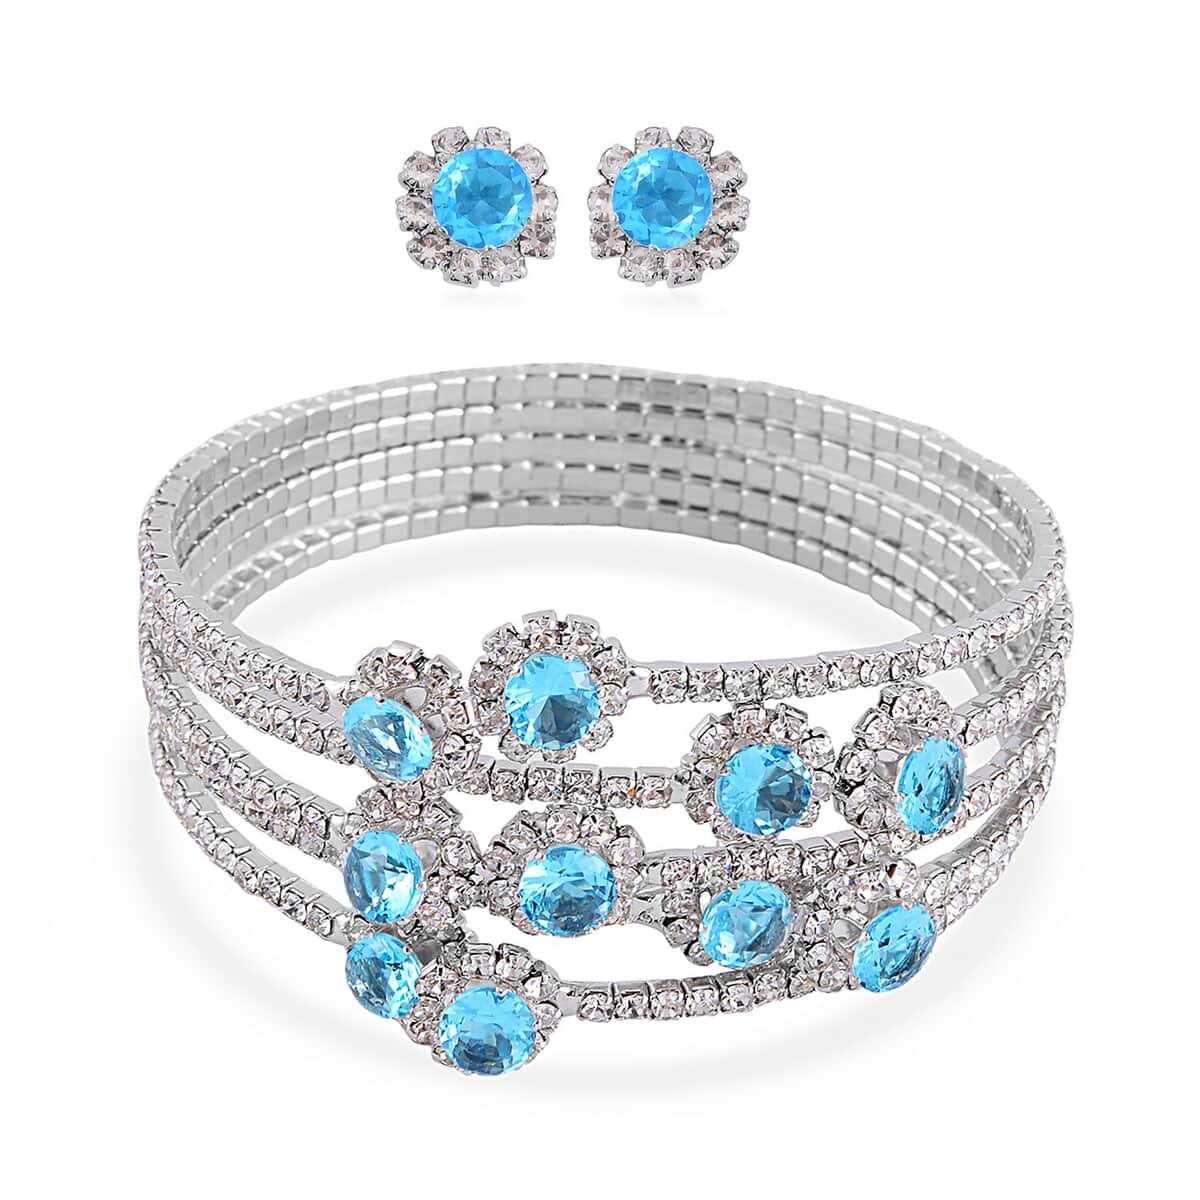 Sky Blue and White Color Austrian Crystal Bangle Bracelet (7-7.5 In) and Earrings in Silvertone image number 0